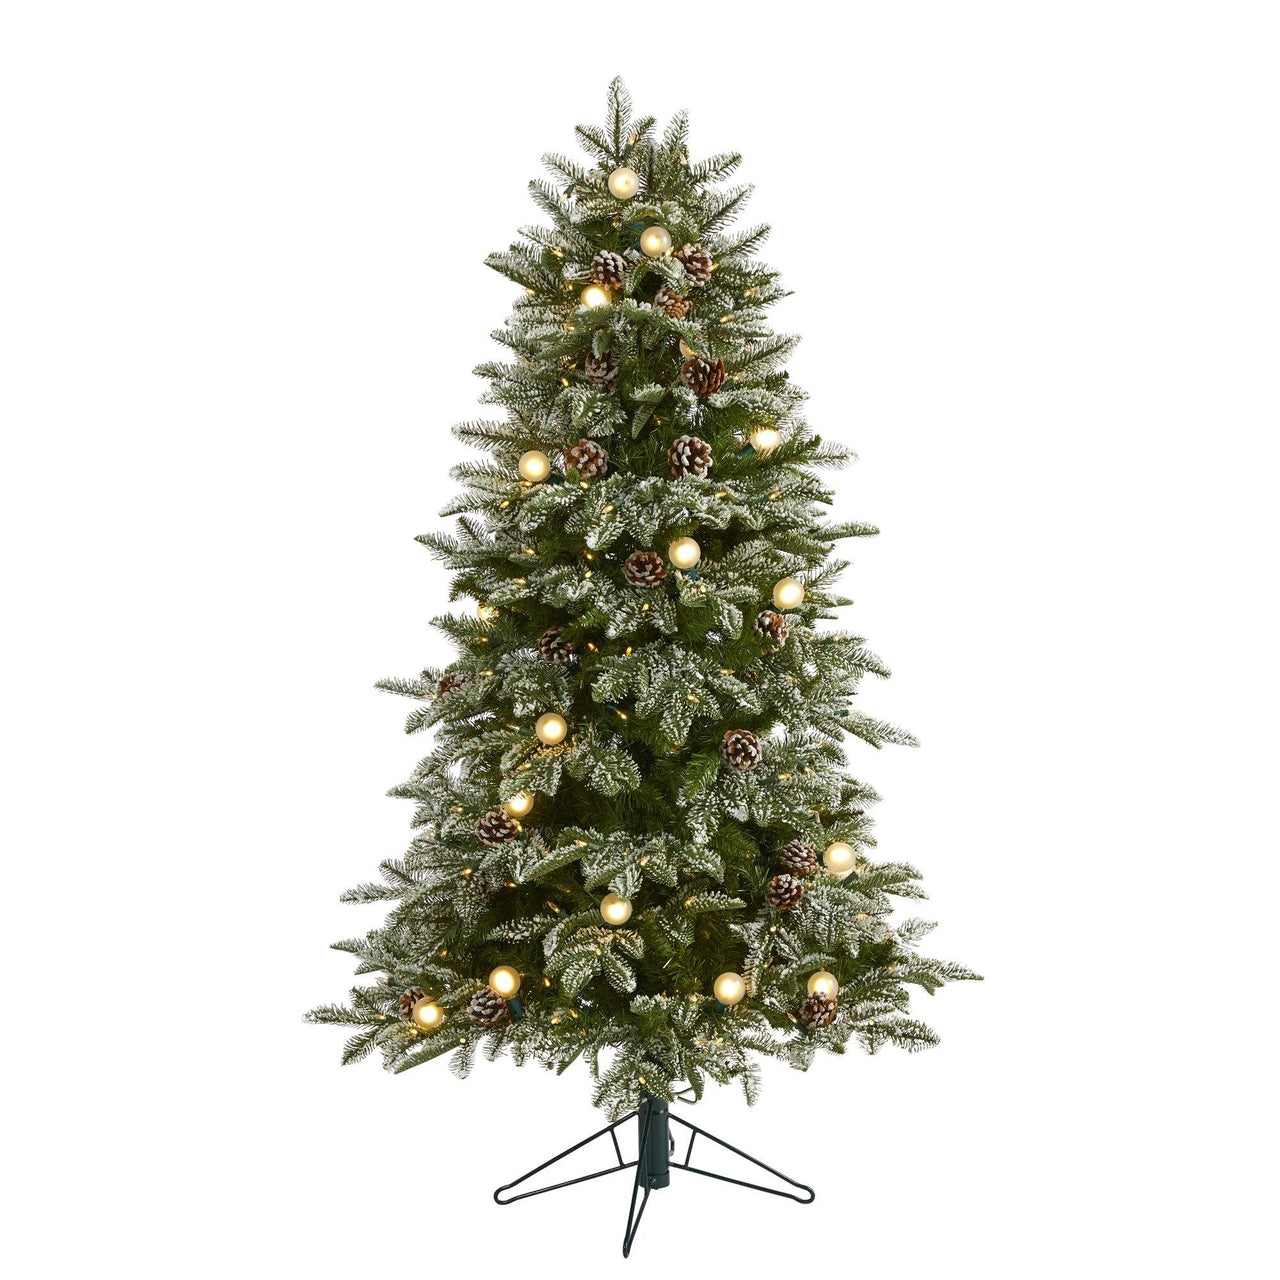 5' Flocked Whistler Mountain Fir Artificial Christmas Tree with 250 Warm White LED Lights with Instant Connect Technology, 28 Globe Bulbs, Pine Cones and 480 Bendable Branches